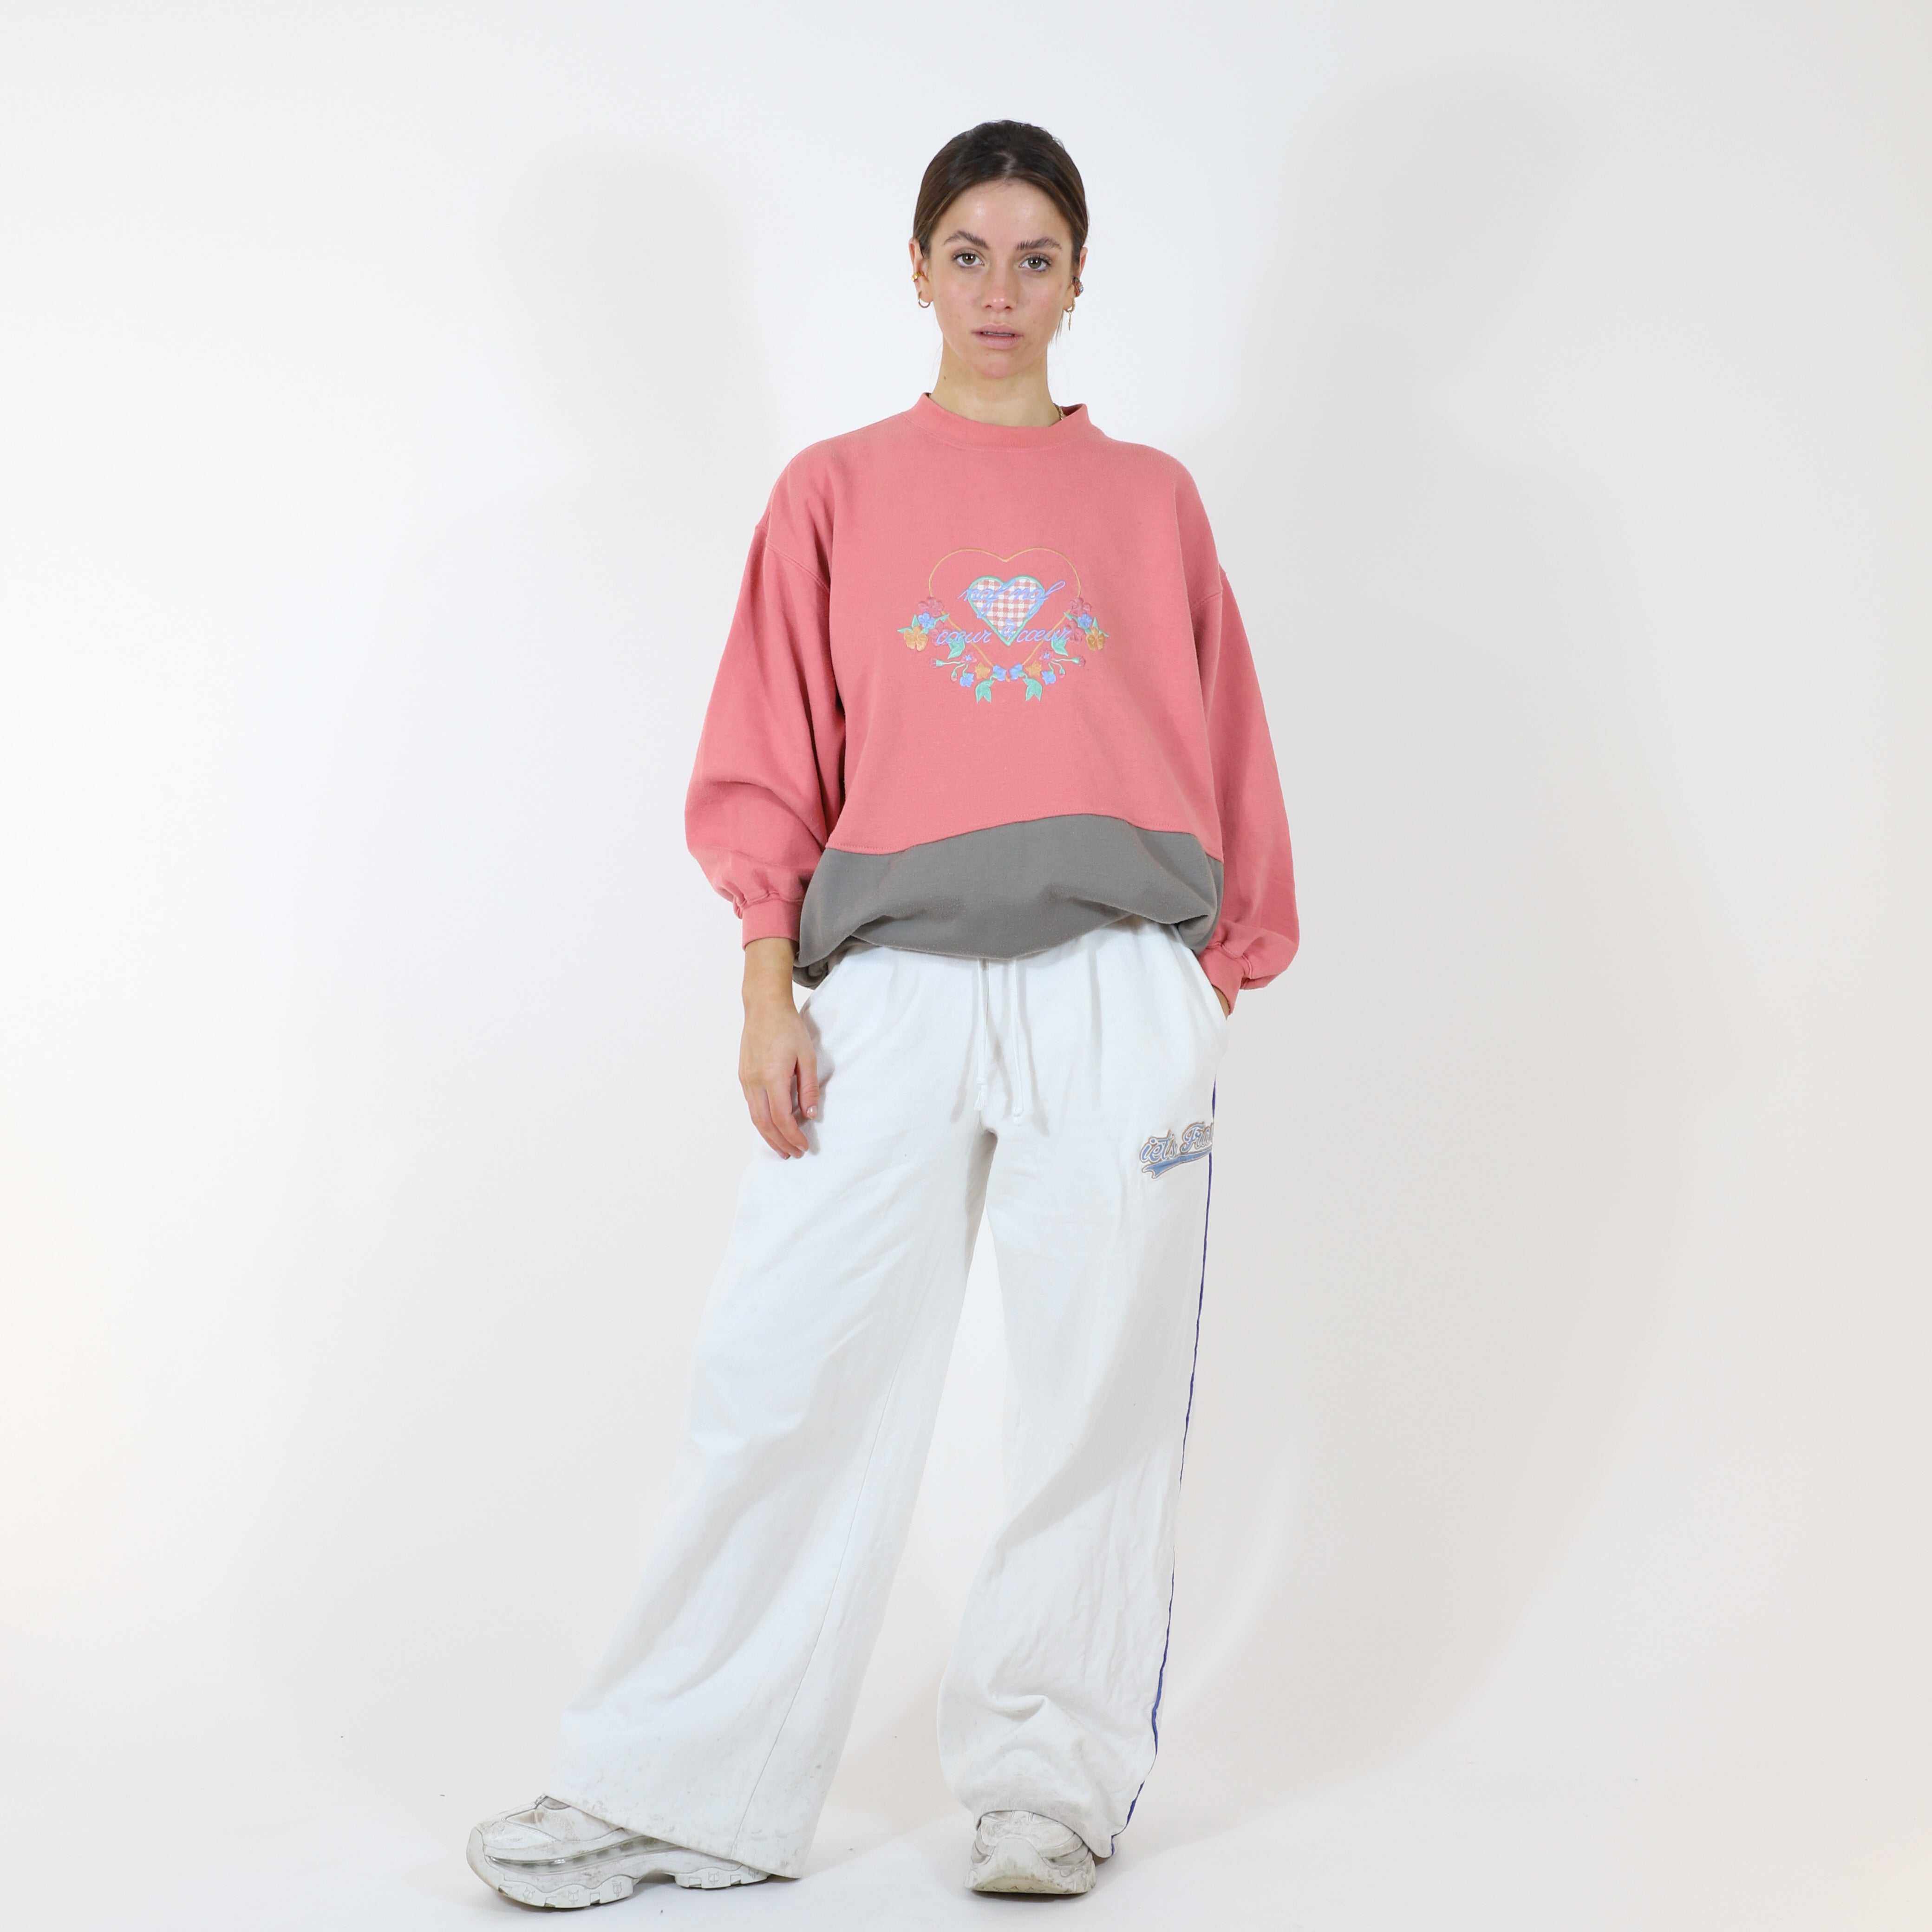 Naf Naf 90's Embroidered Spellout Sweatshirt in Pink and Grey – hmsvintage